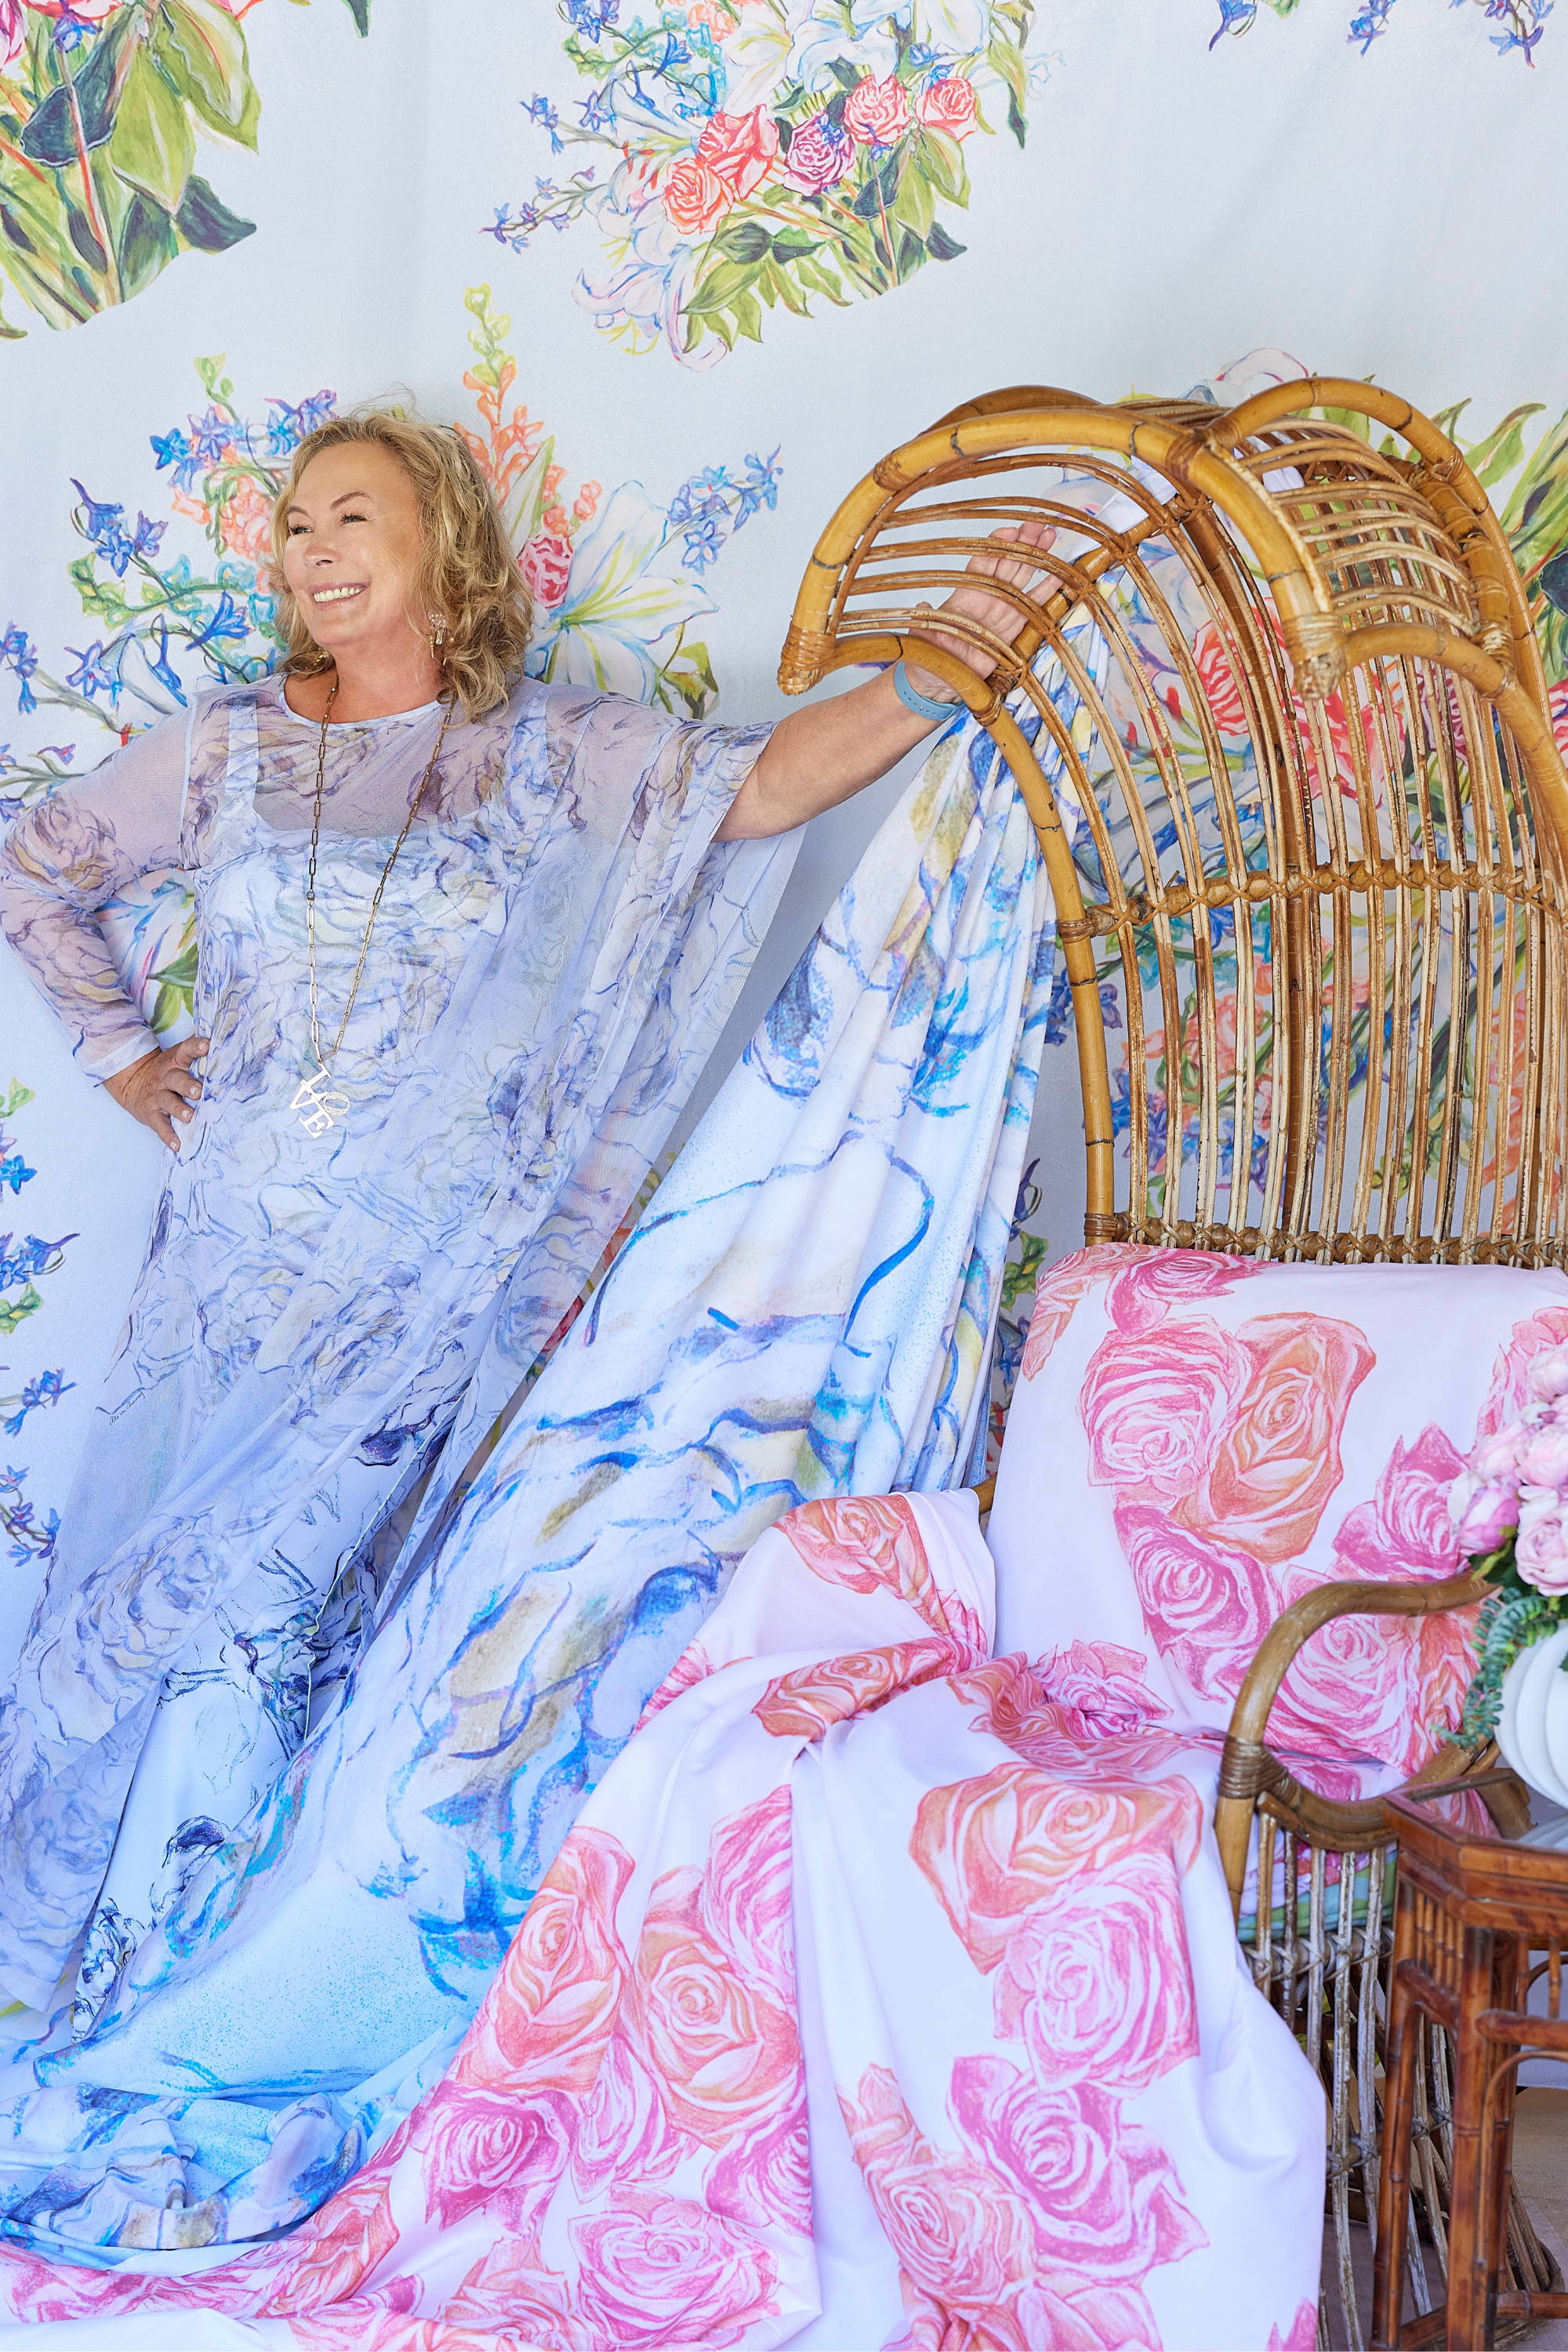 Ala Isham wearing blue rose printed mesh kaftan over matching stretch knit long dress at her house in Antigua